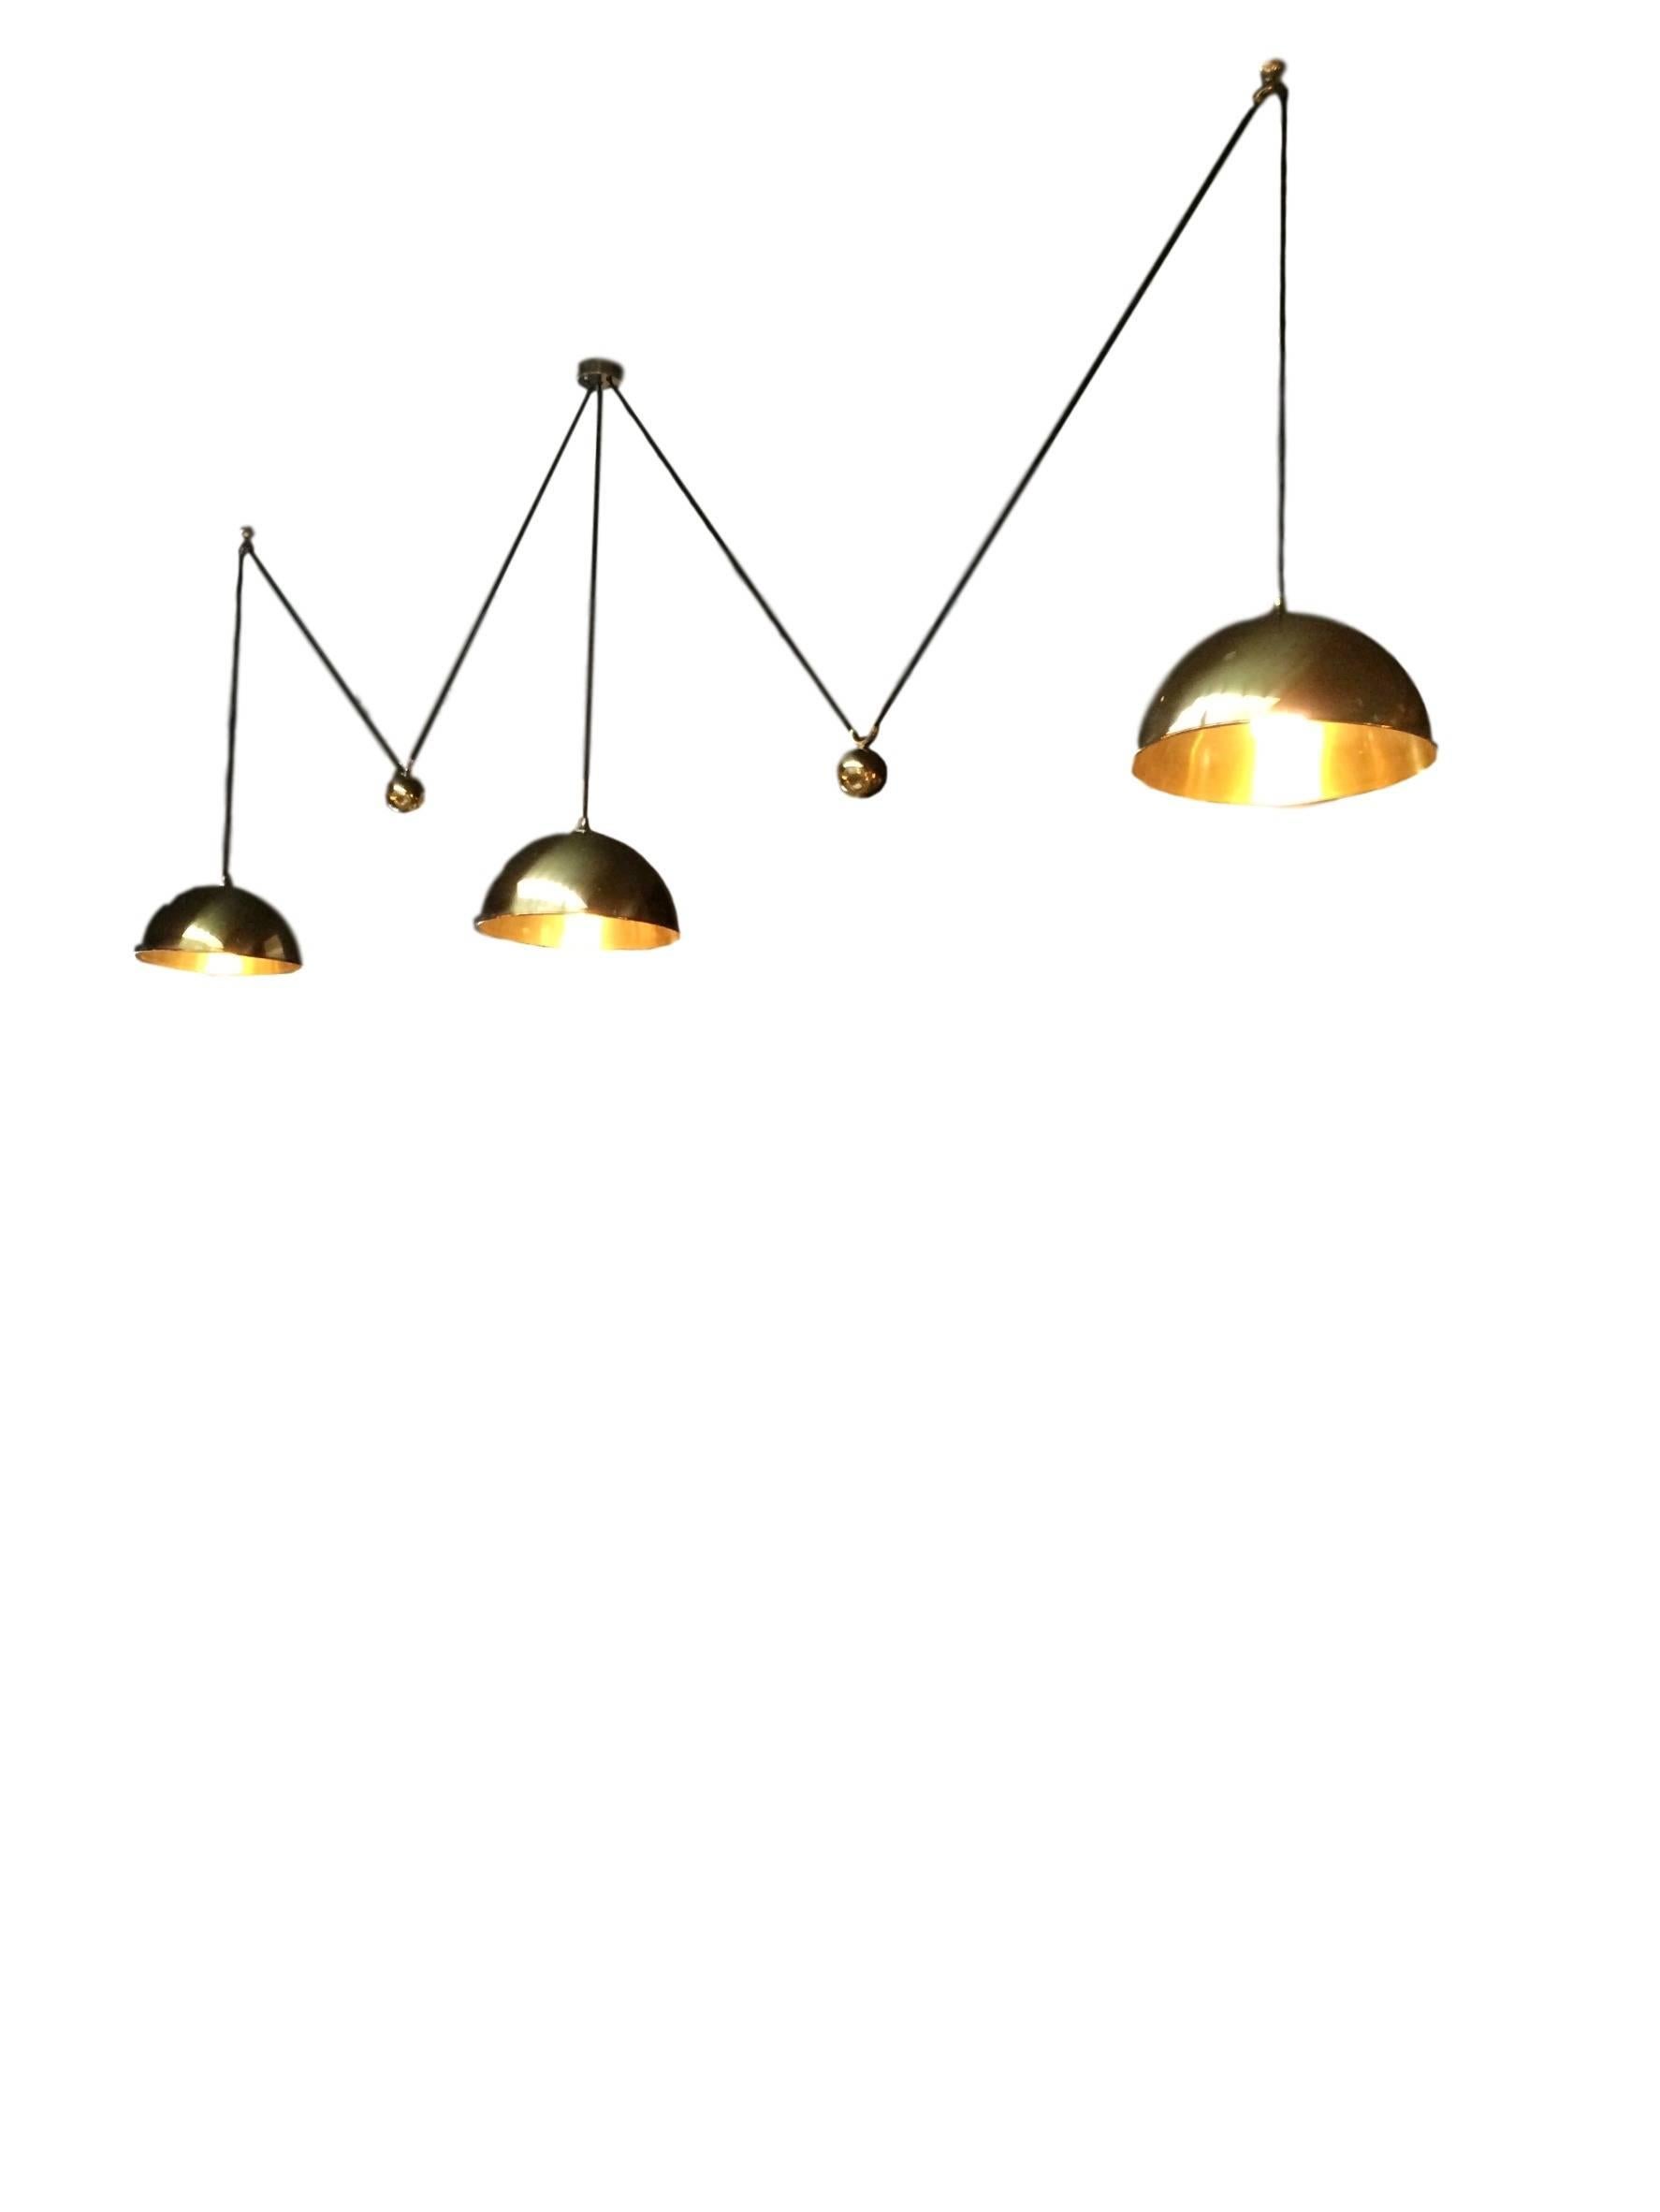 Extremely rare triple counter balance pendants by Florian Schulz. Three brass domes with brass counter weights, canopy and hardware. Black cloth cord. Center brass pendant is manually adjusted to the desired height and held by a set screw inside the